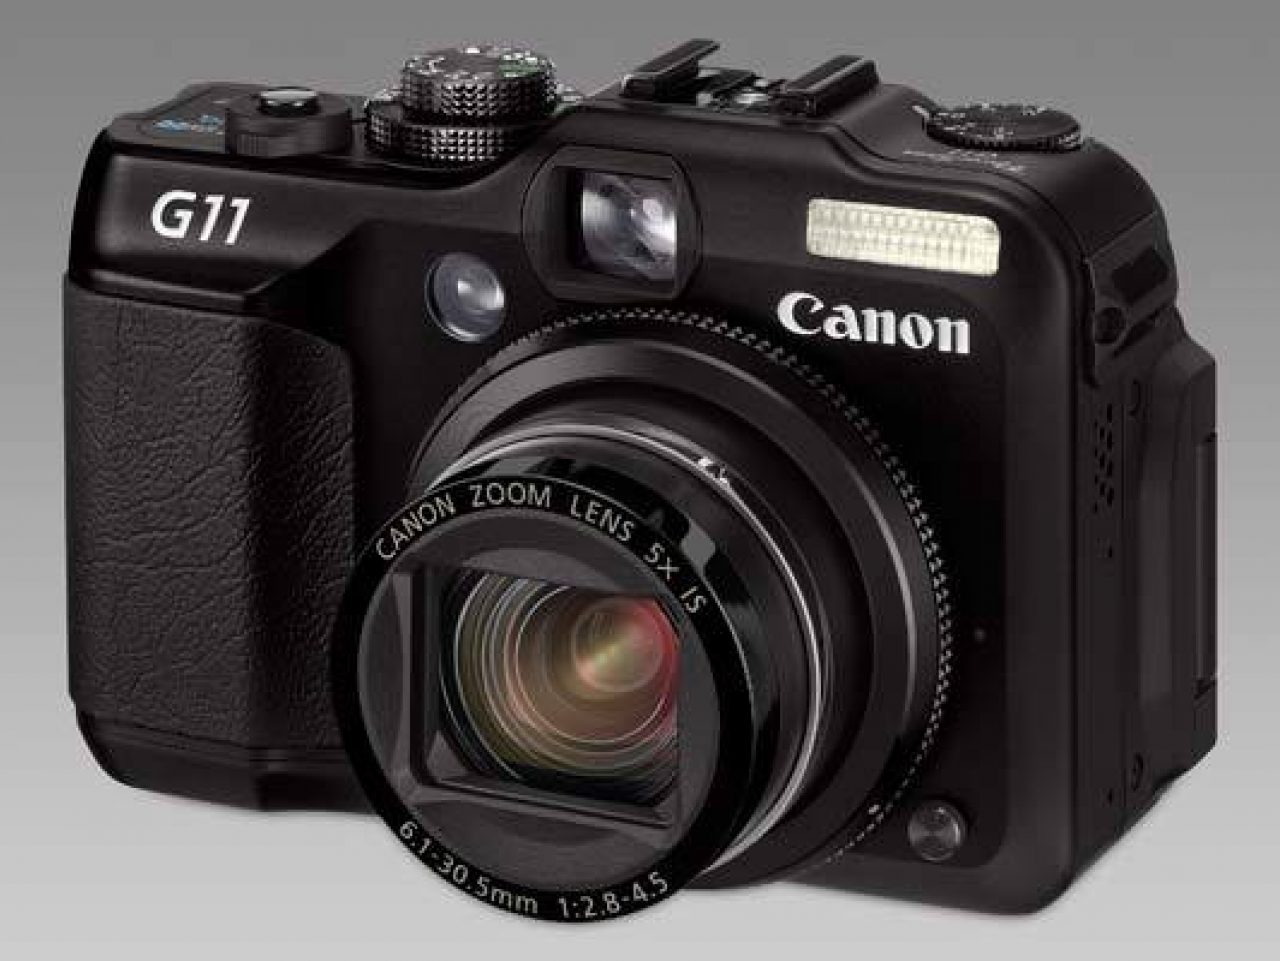 Canon PowerShot G11 Review | Photography Blog